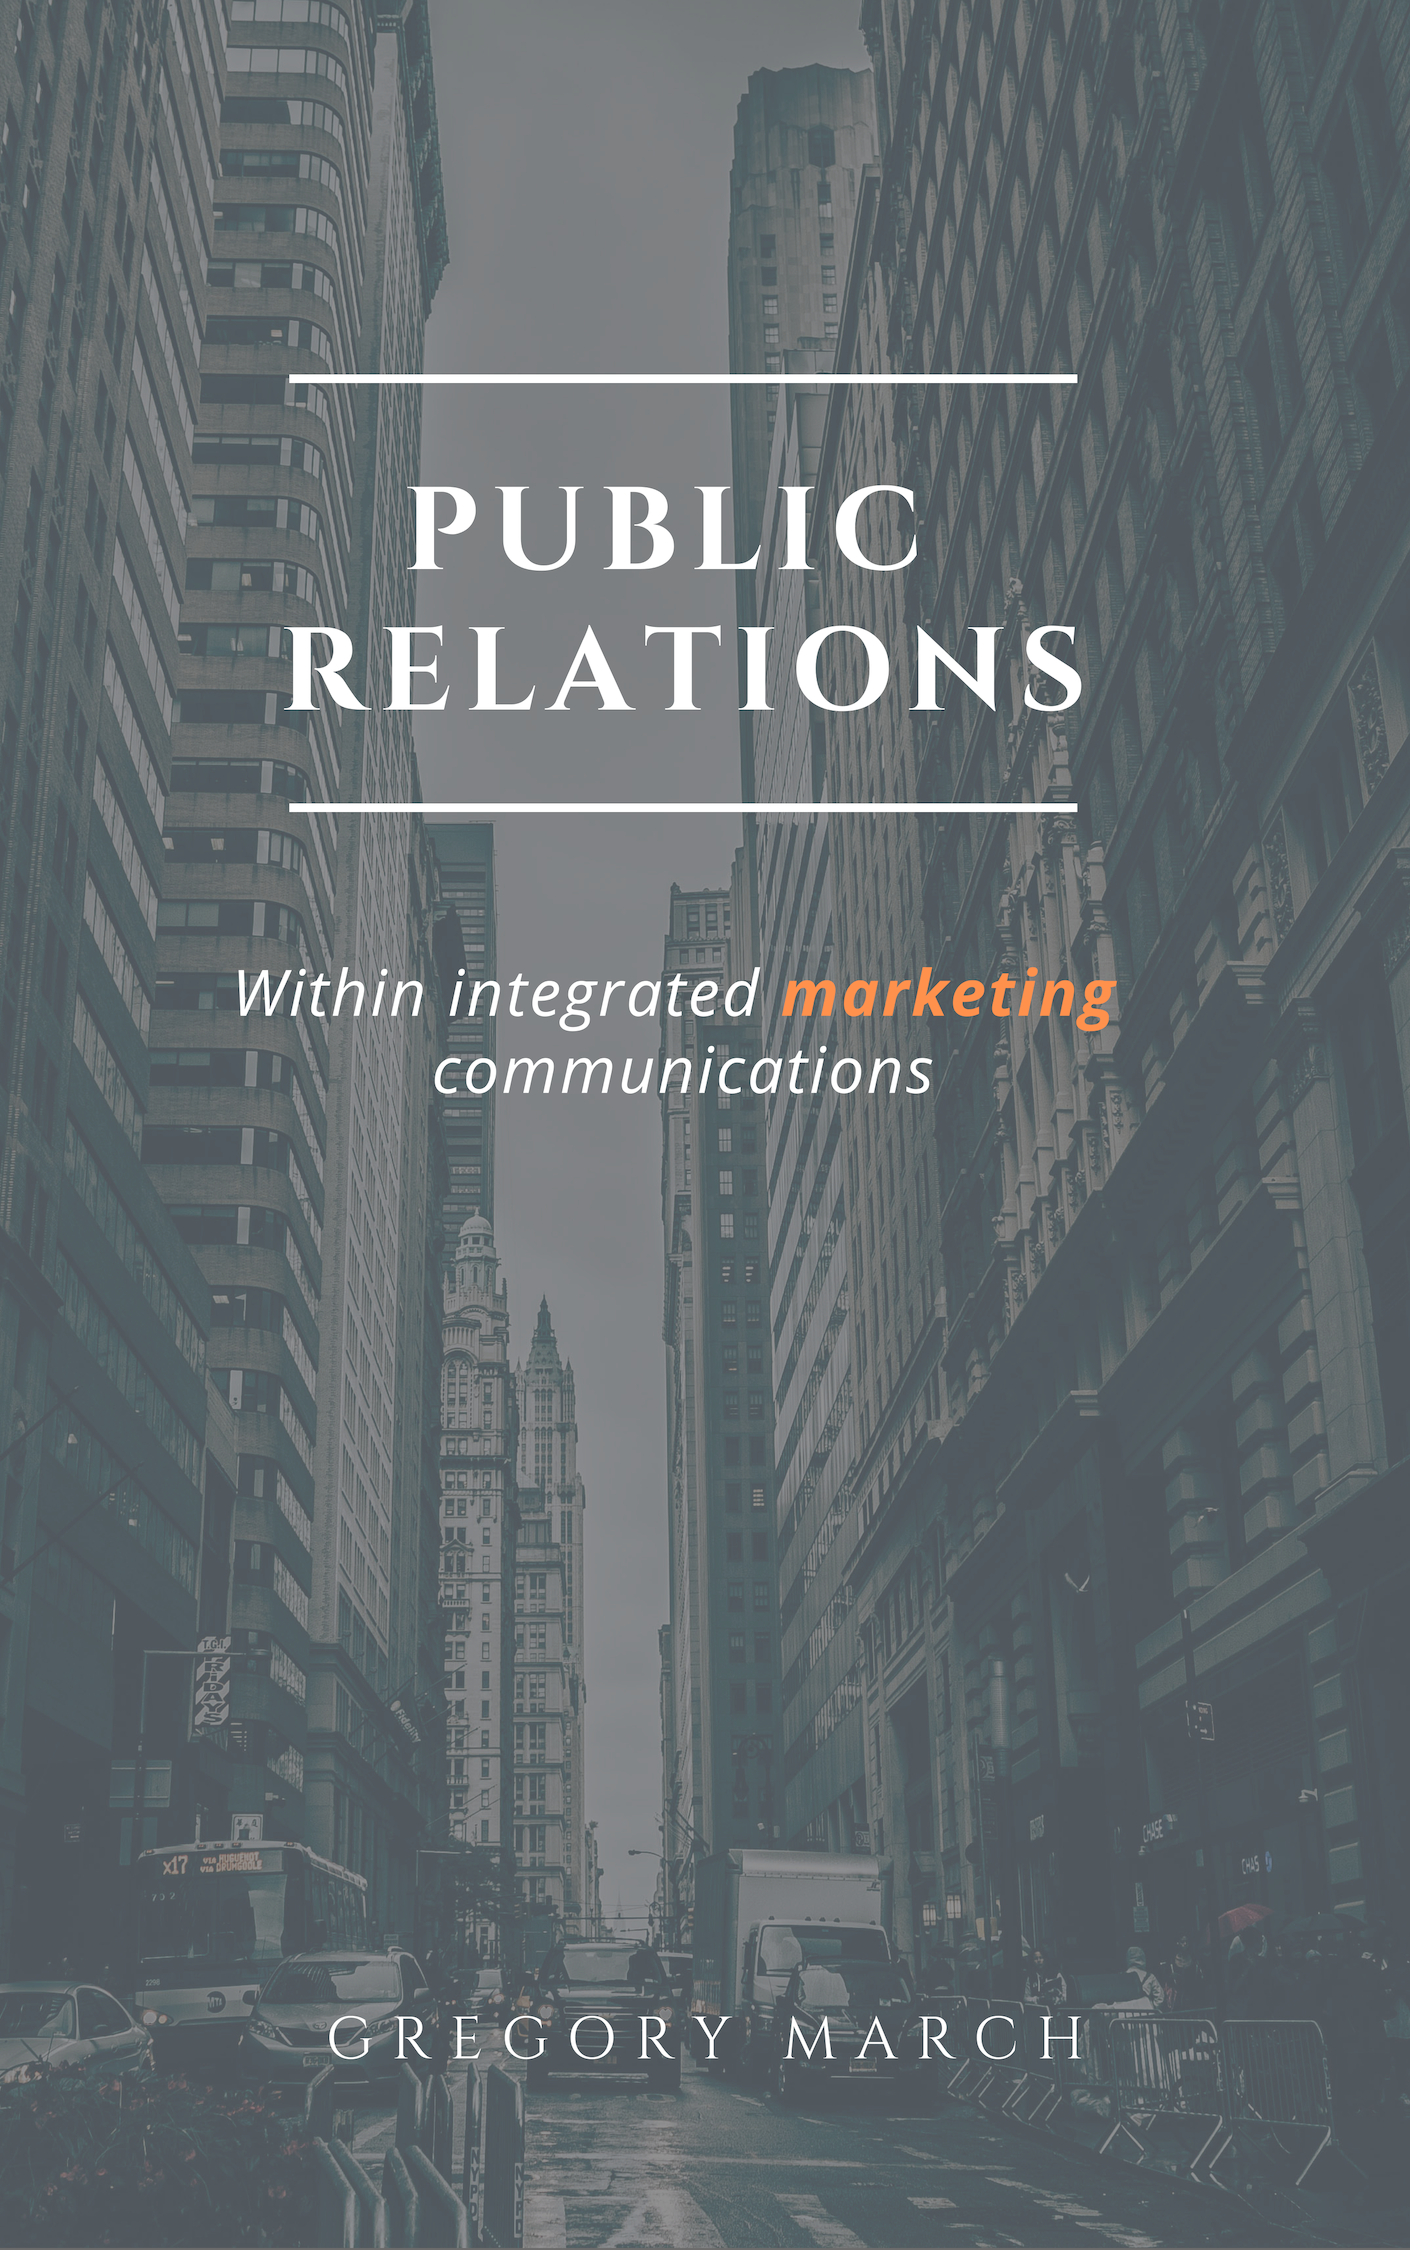 FREE: Public Relations within integrated marketing communications by Gregory March